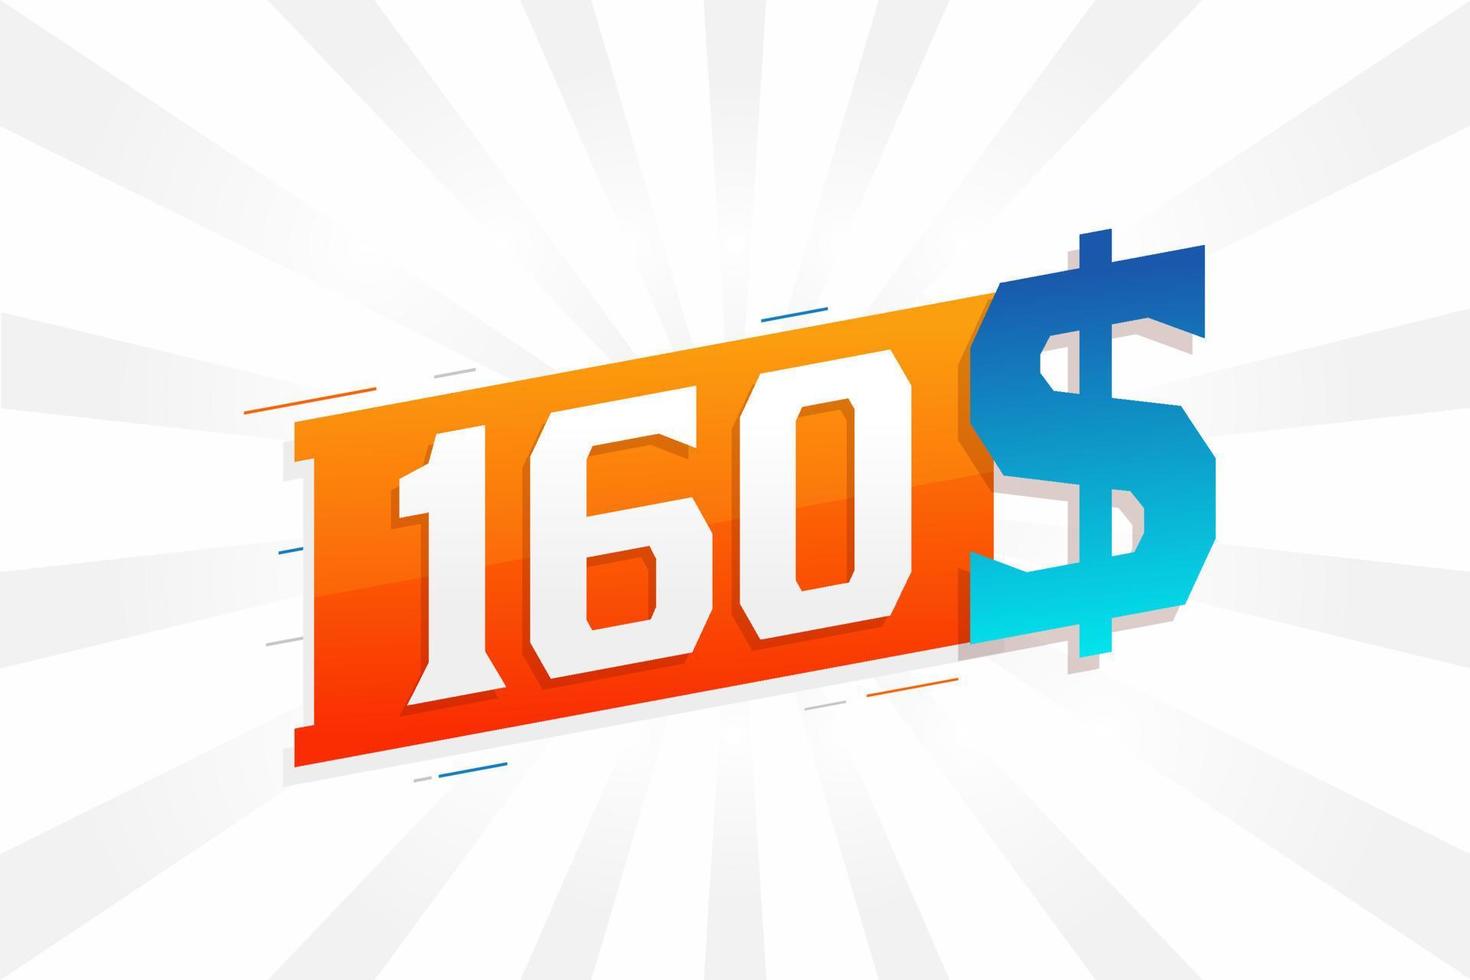 160 Dollar currency vector text symbol. 160 USD United States Dollar American Money stock vector